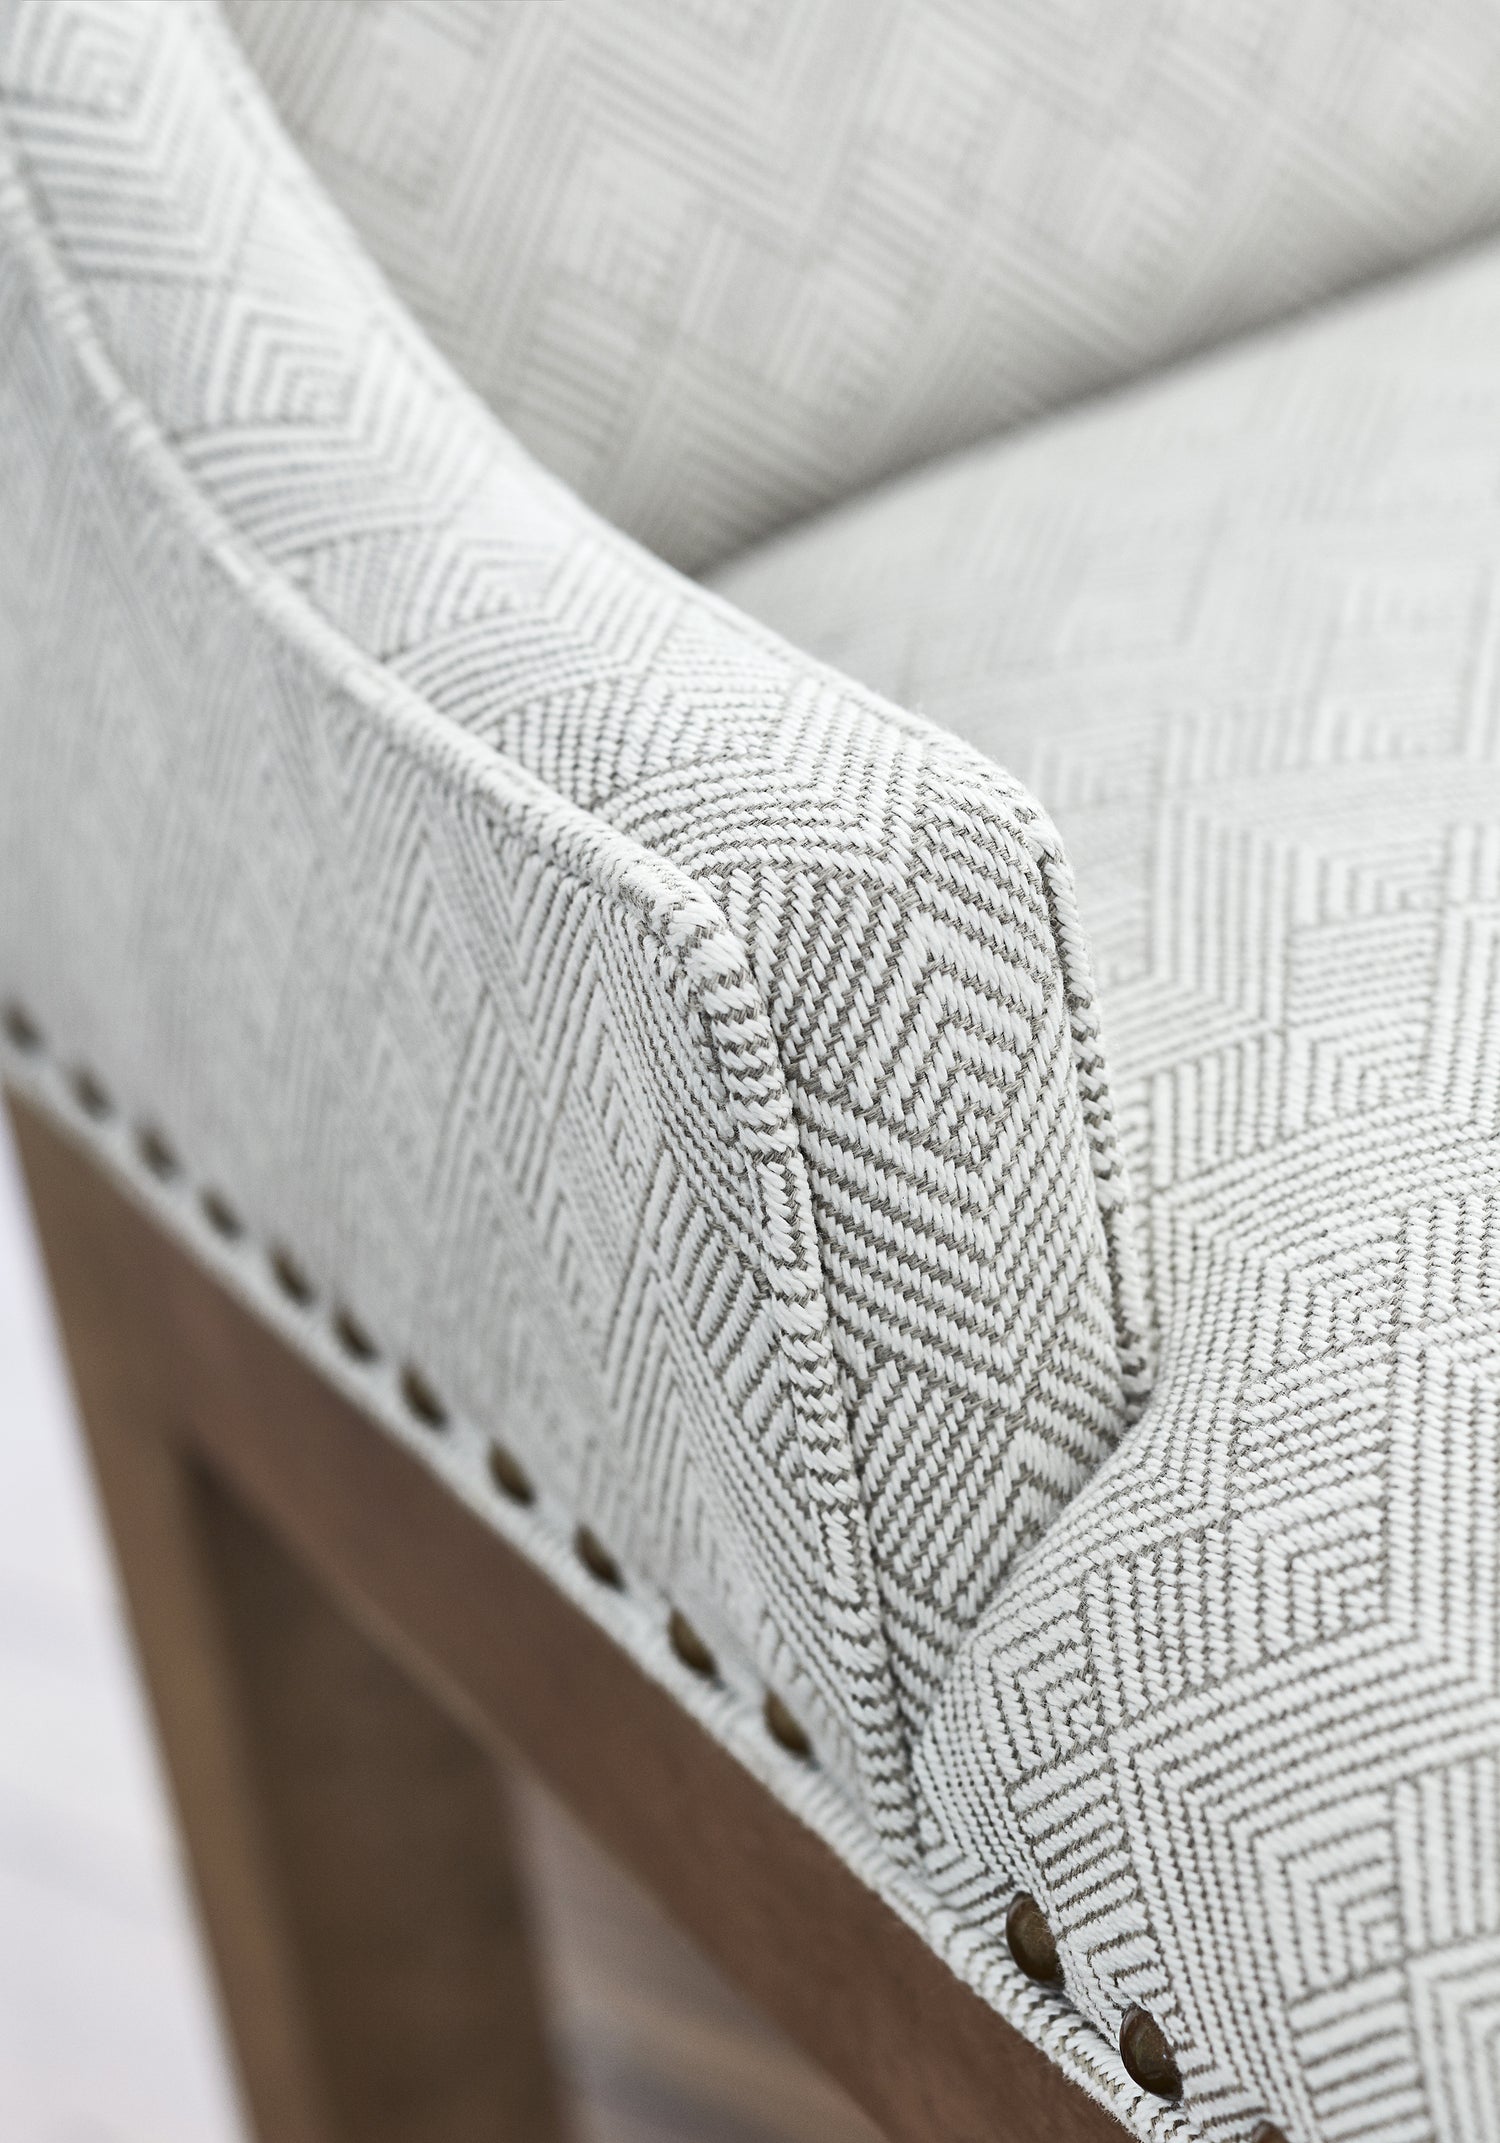 Detailed Maddox woven fabric in jute color, pattern number W73333 of the Thibaut Nomad collection